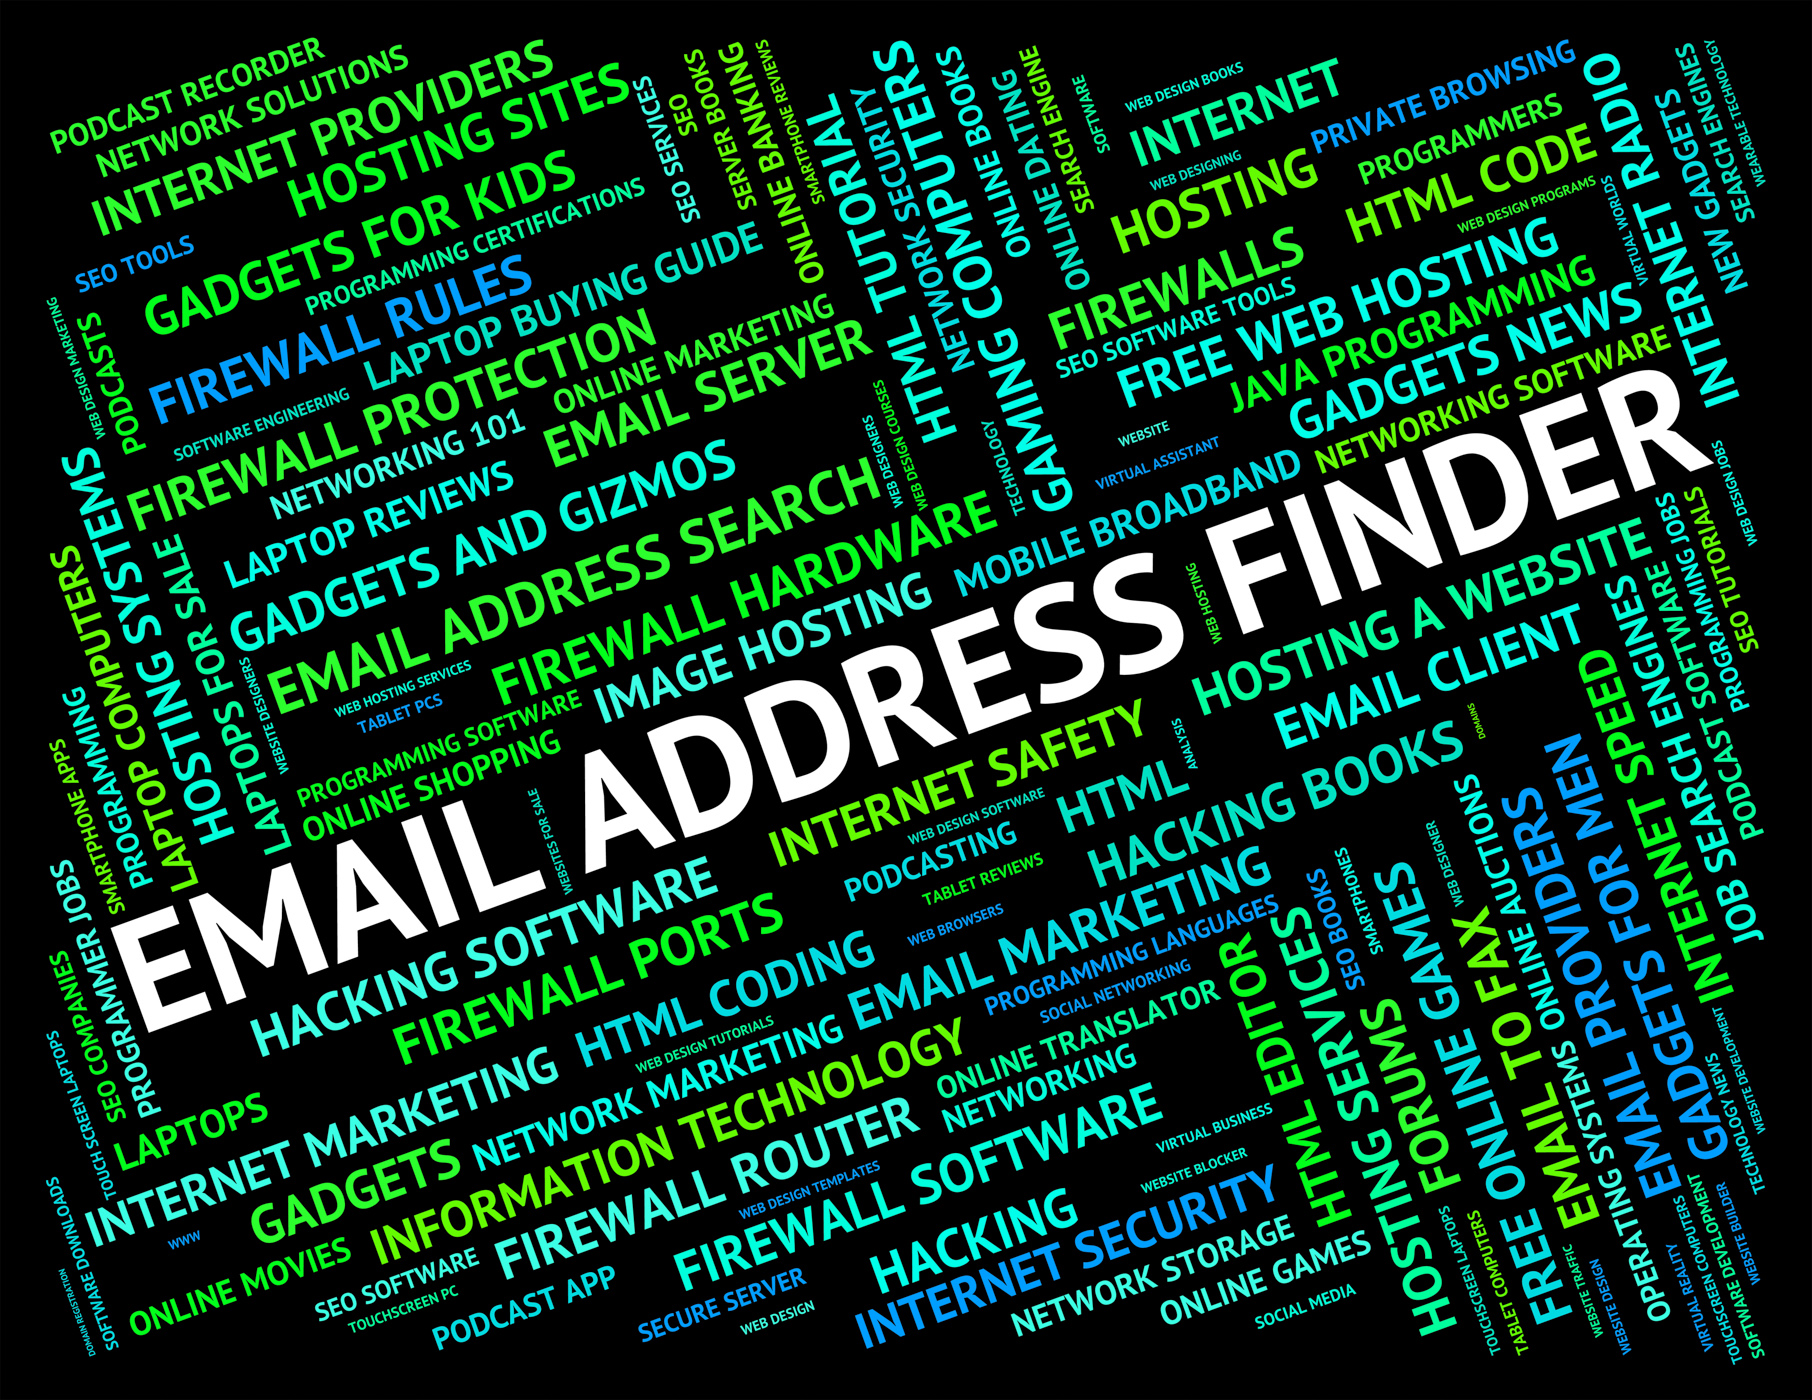 Email address finder means send message and addresses photo